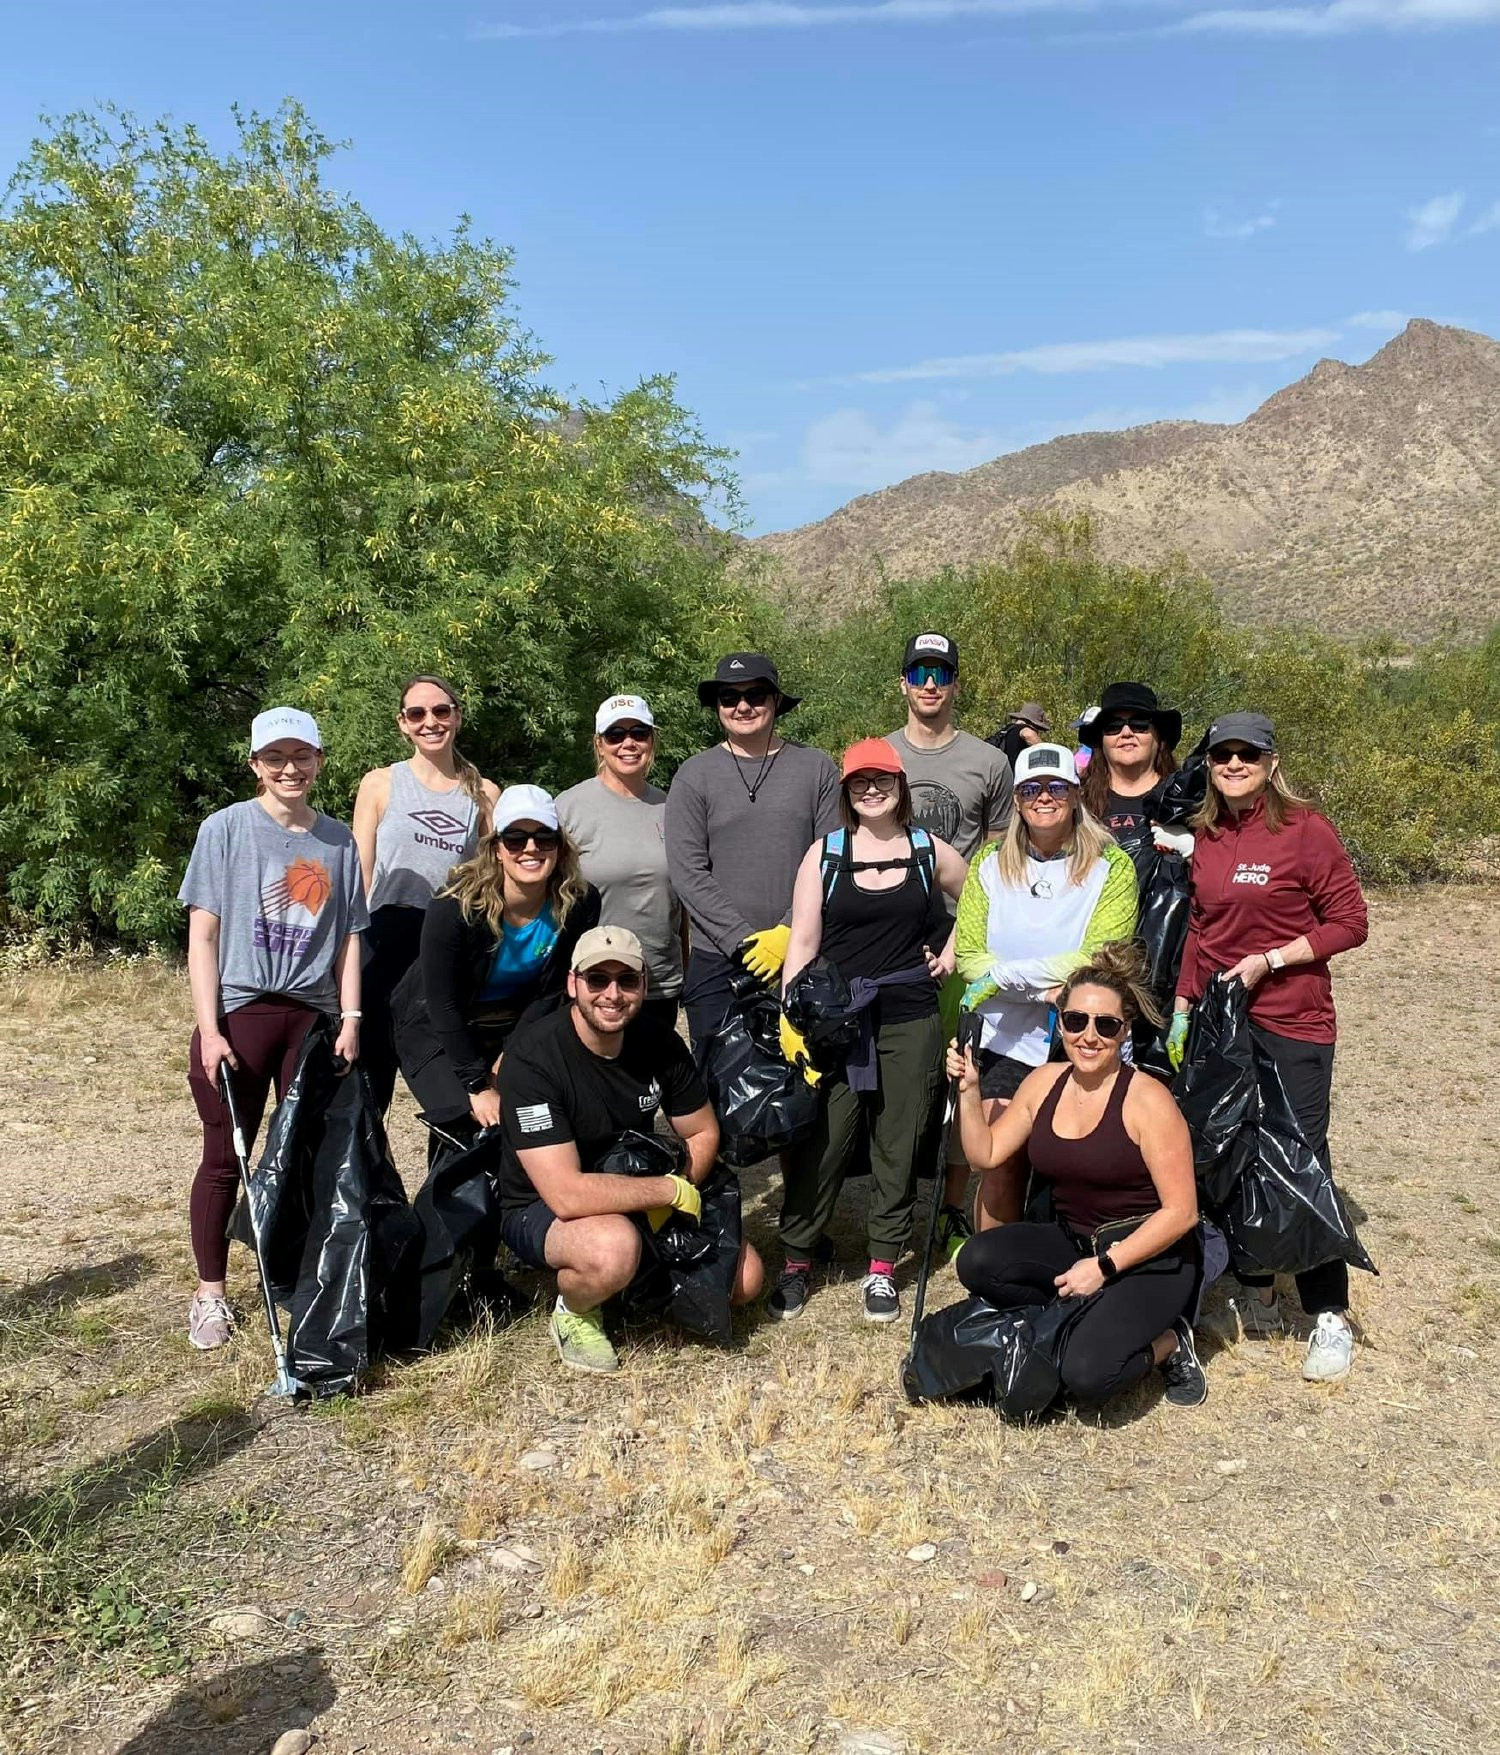 Home office team members using their Cove Cares hours to participate in a trail cleanup hike.